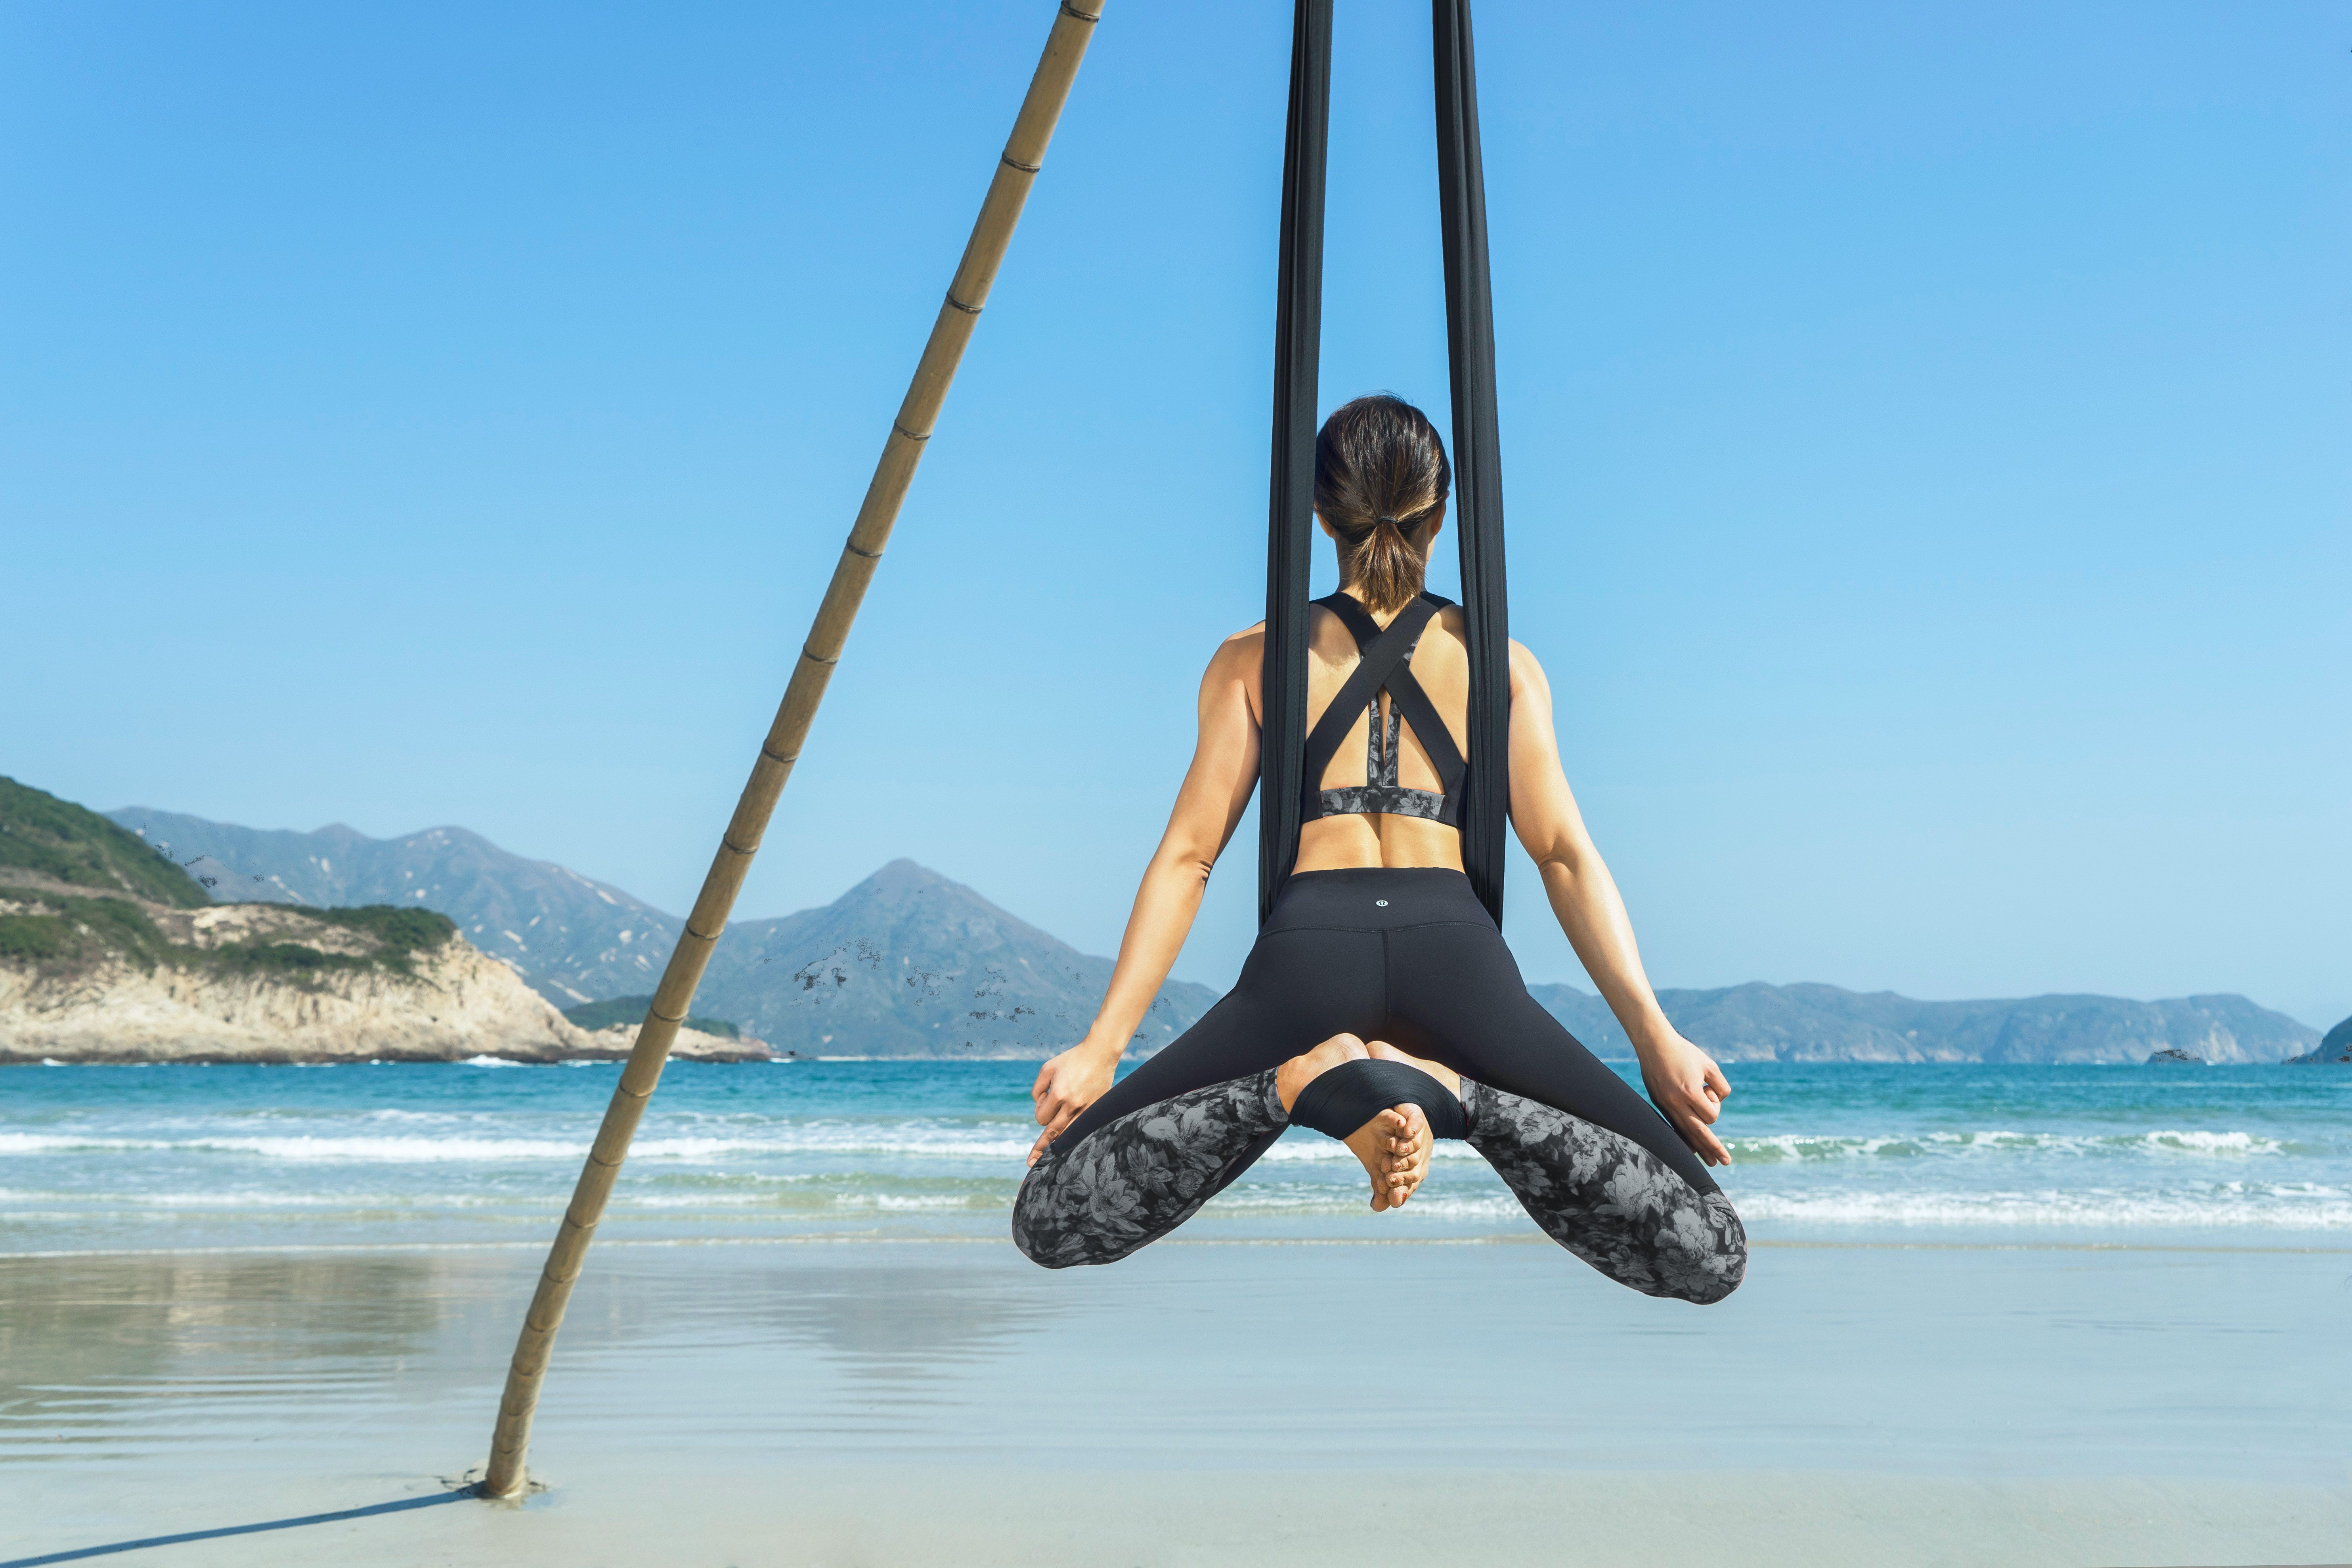 Yoga on ropes: what happened when I tried the new TRX fitness craze